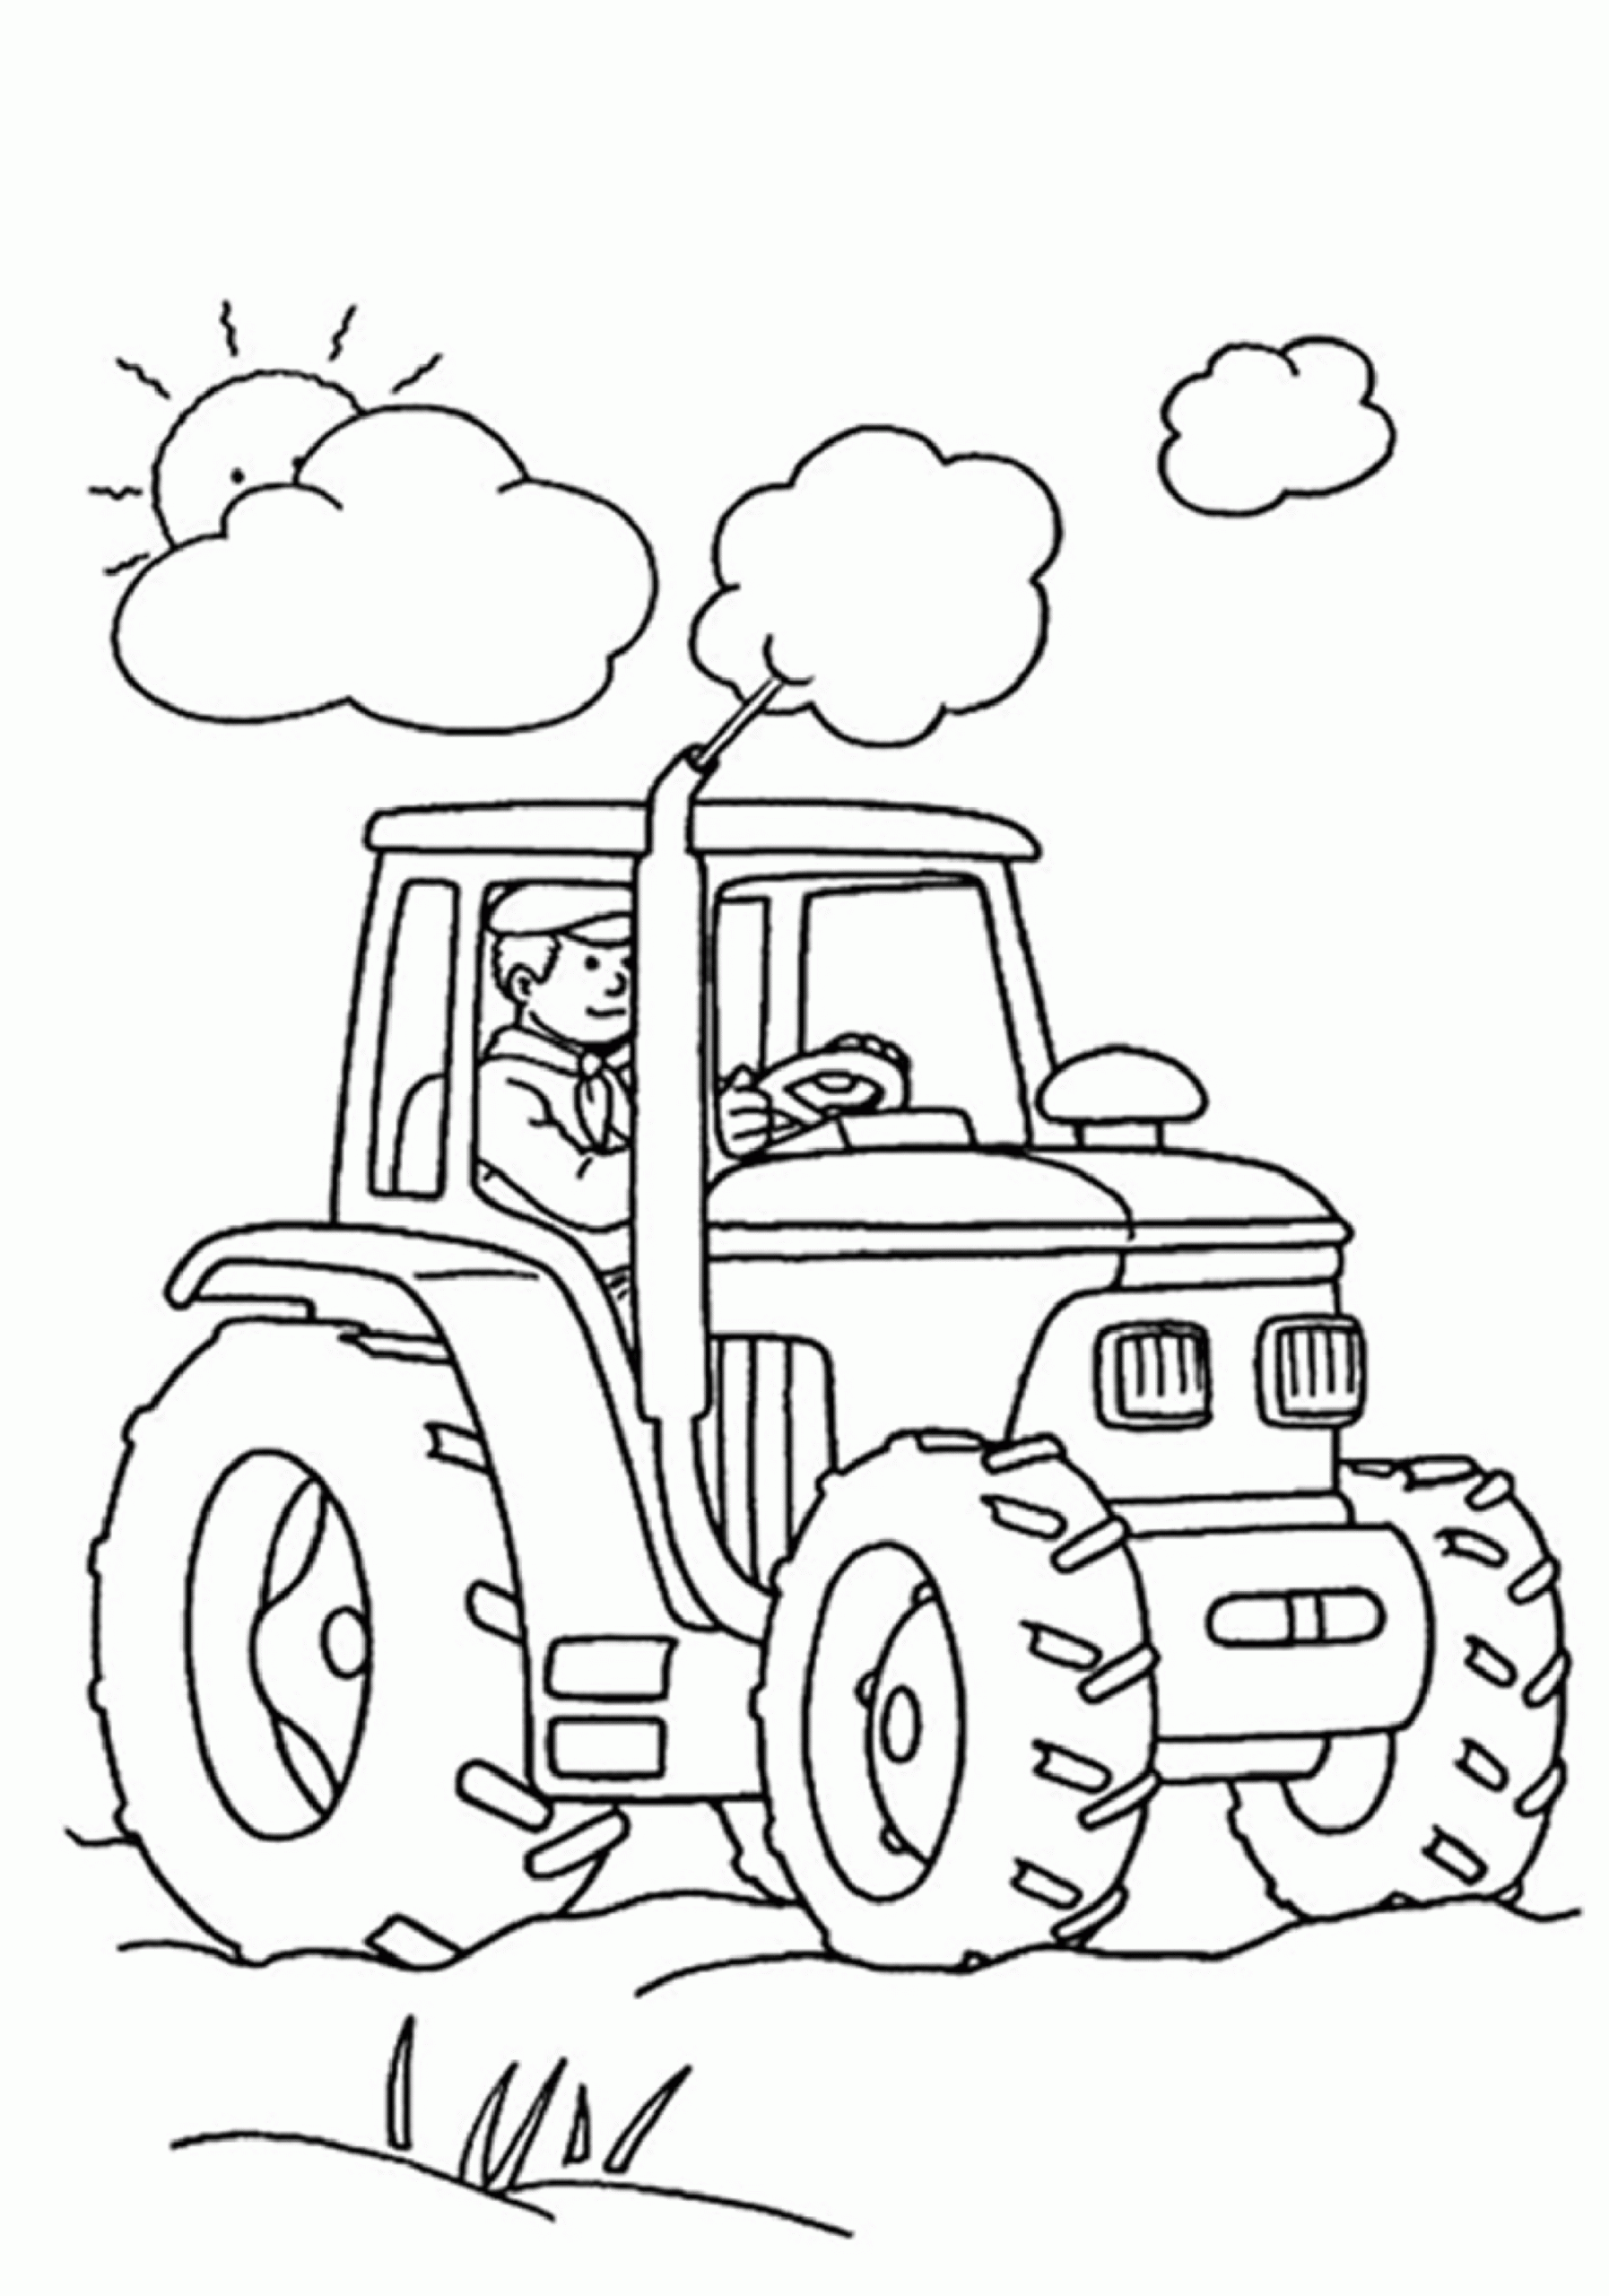 Coloring Pages For Boys And Girls
 Coloring Lab